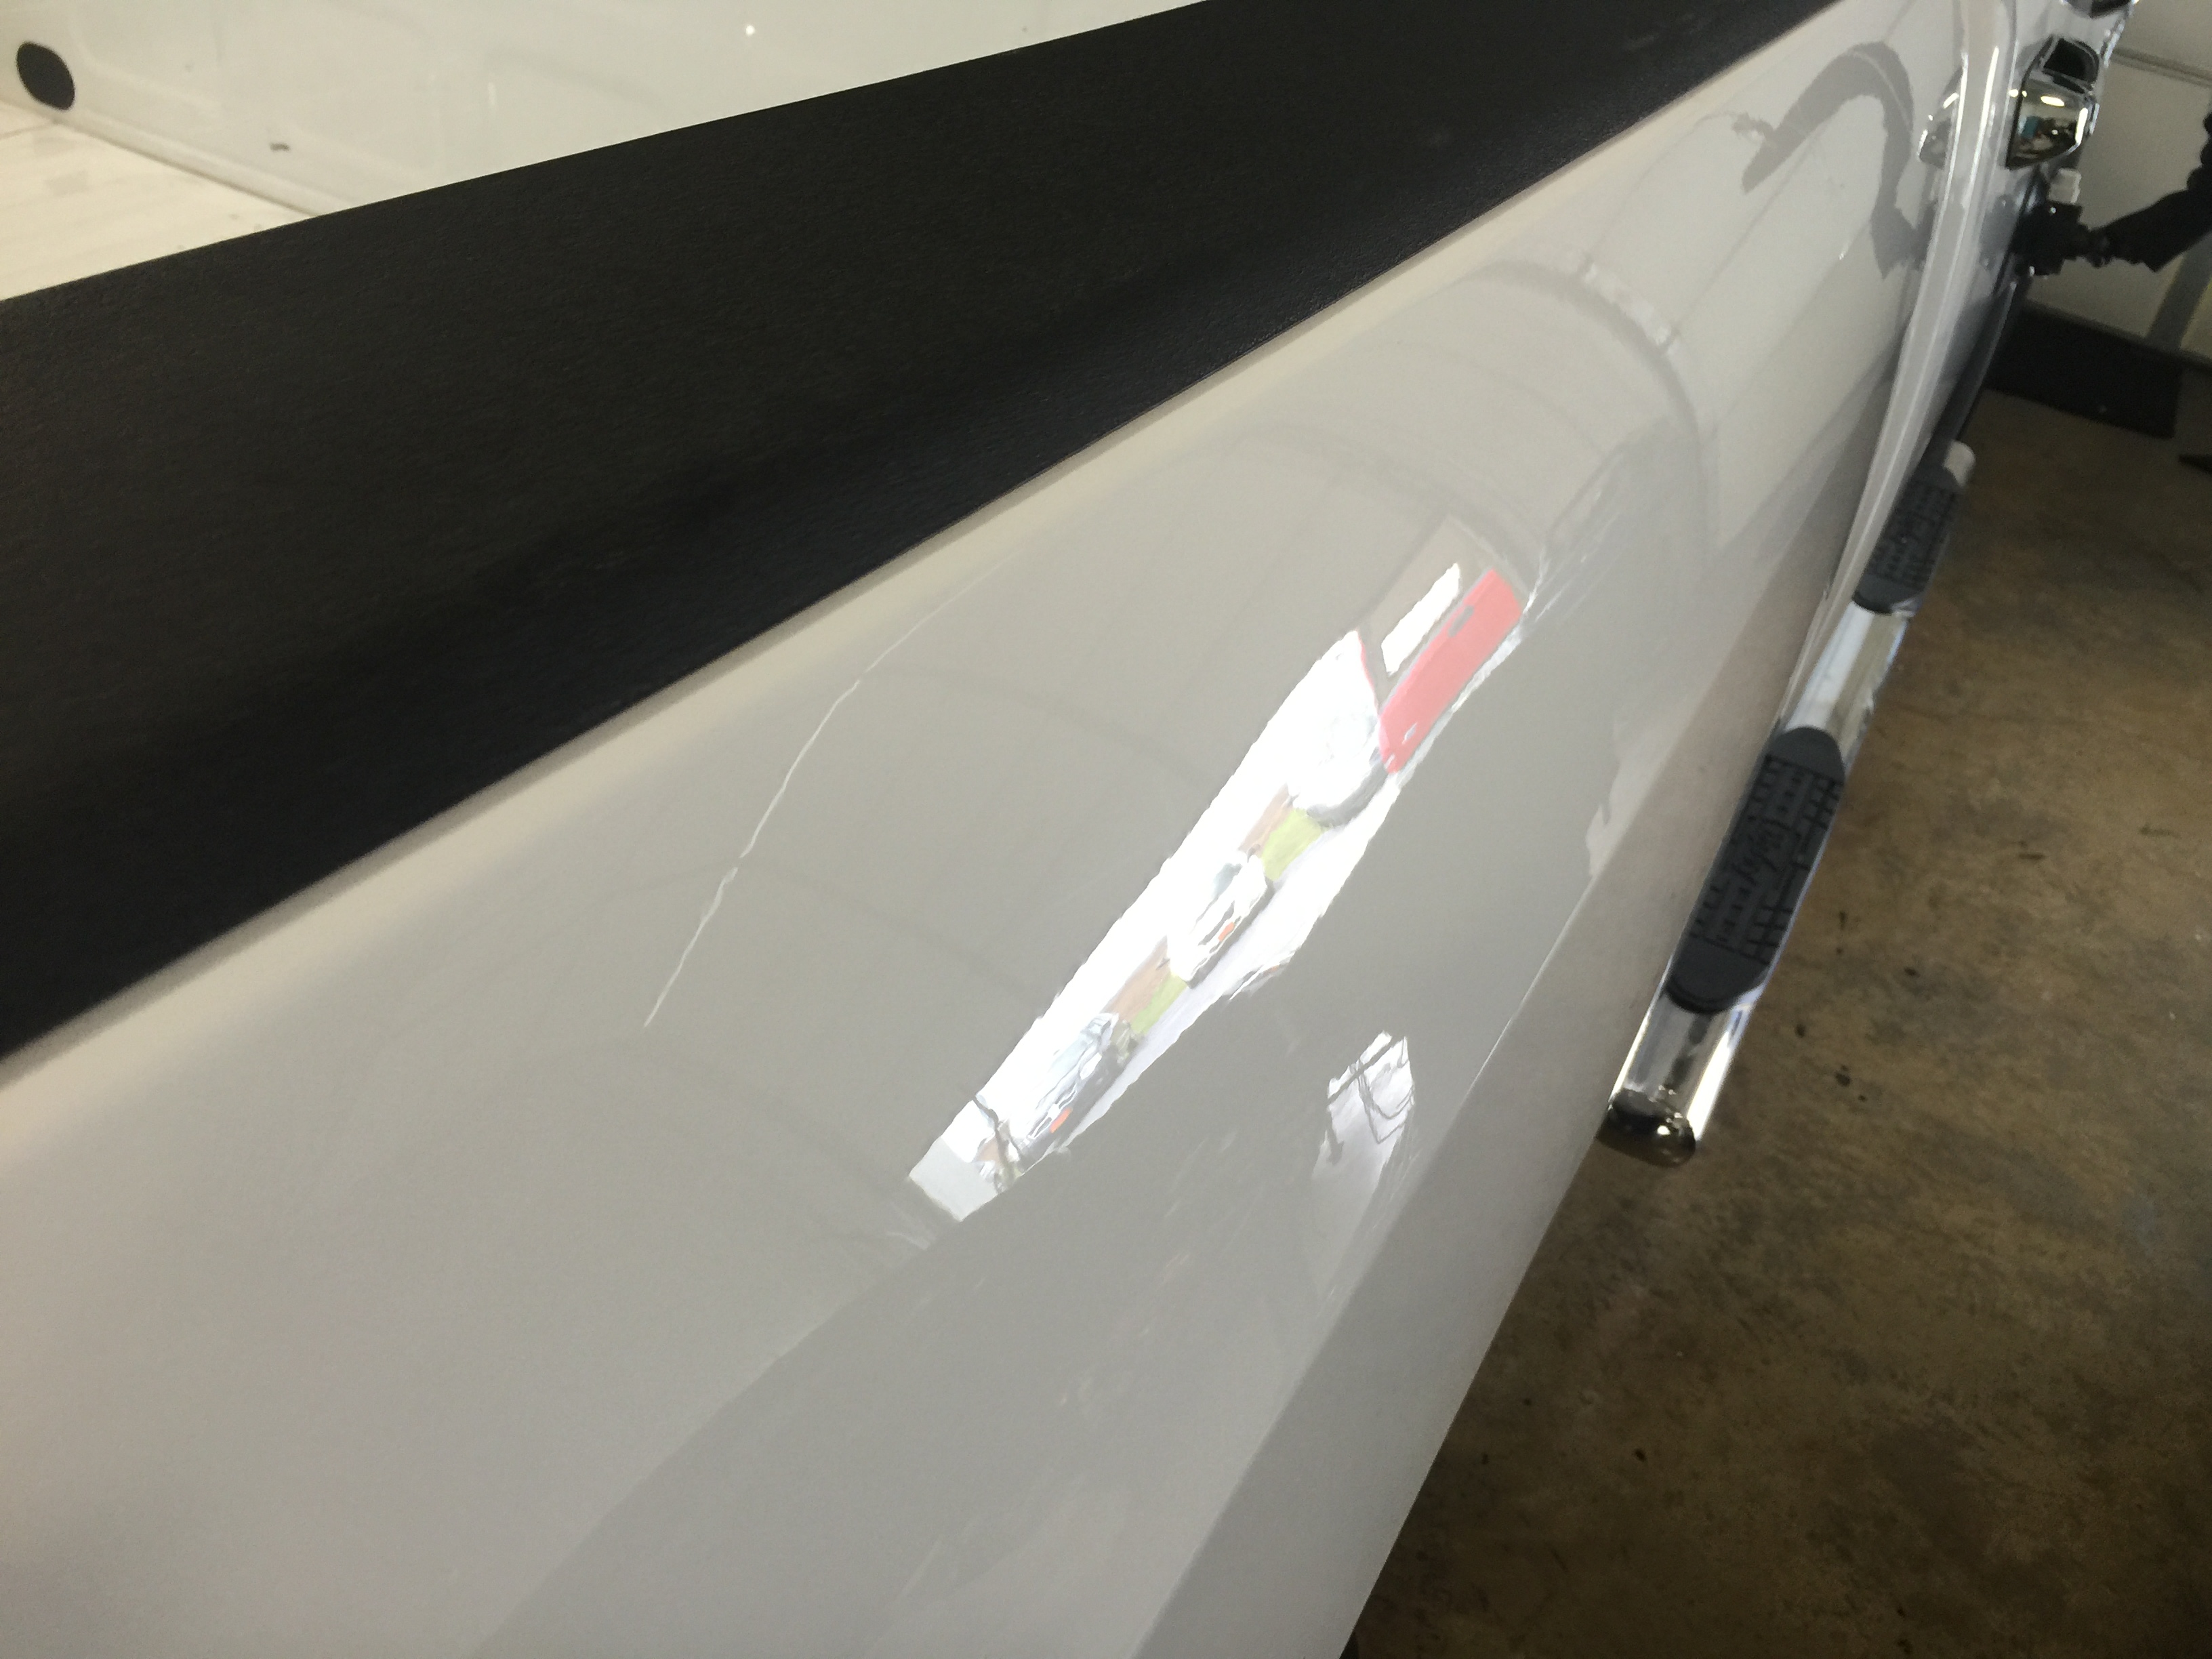 2013 Dodge Ram Dent in Bed side of Vehicle, Removed with Mobile Dent Removal Springfield IL, http://217dent.com